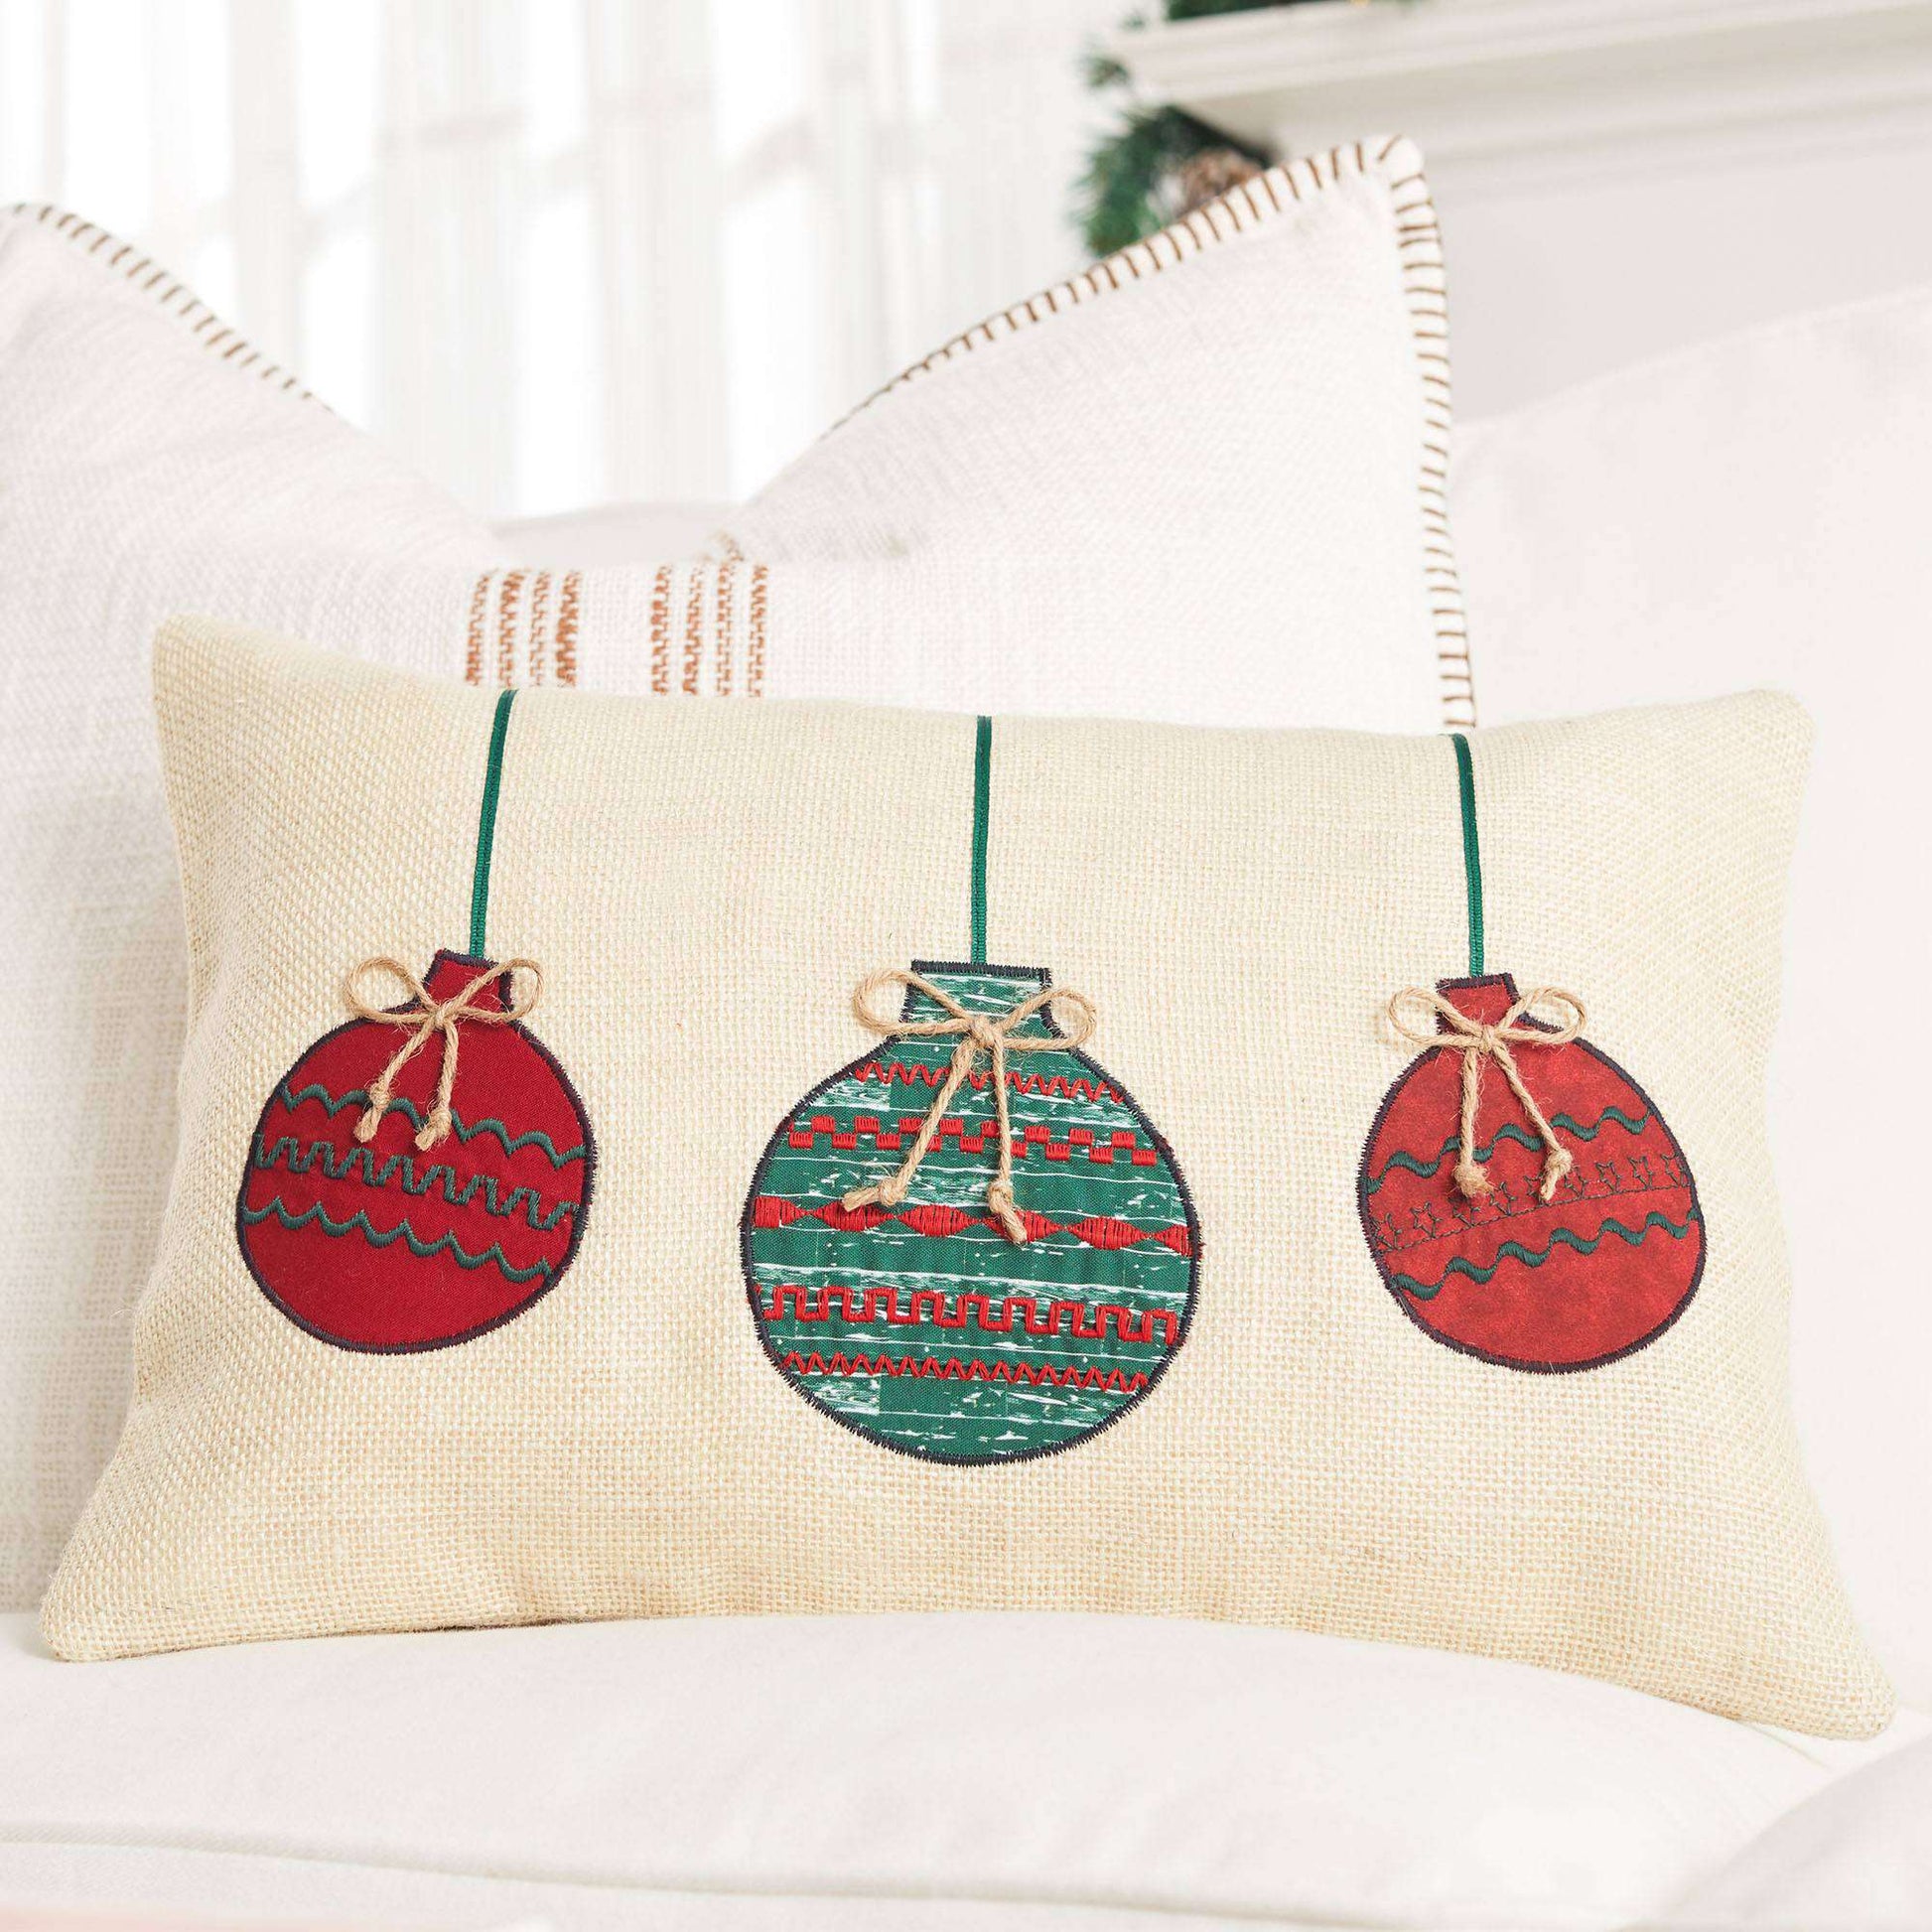 Free Coats & Clark Sewing Ornament Trio Pillow Pattern